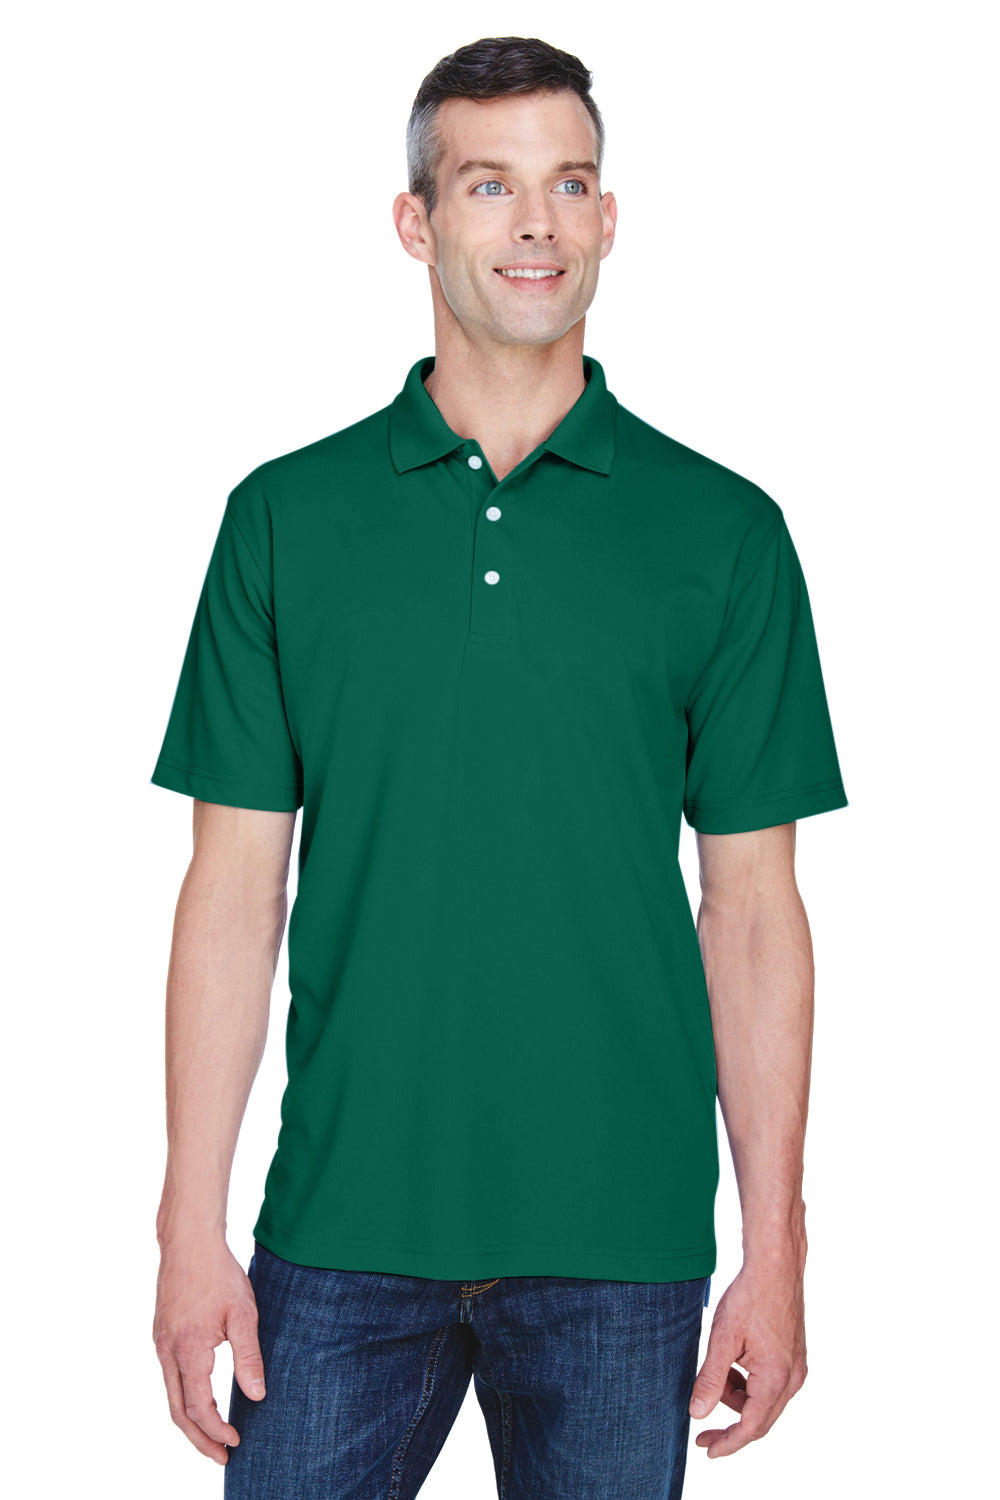 UltraClub 8445 Mens Cool & Dry Performance Moisture Wicking Short Sleeve Polo Shirt Forest Green Front